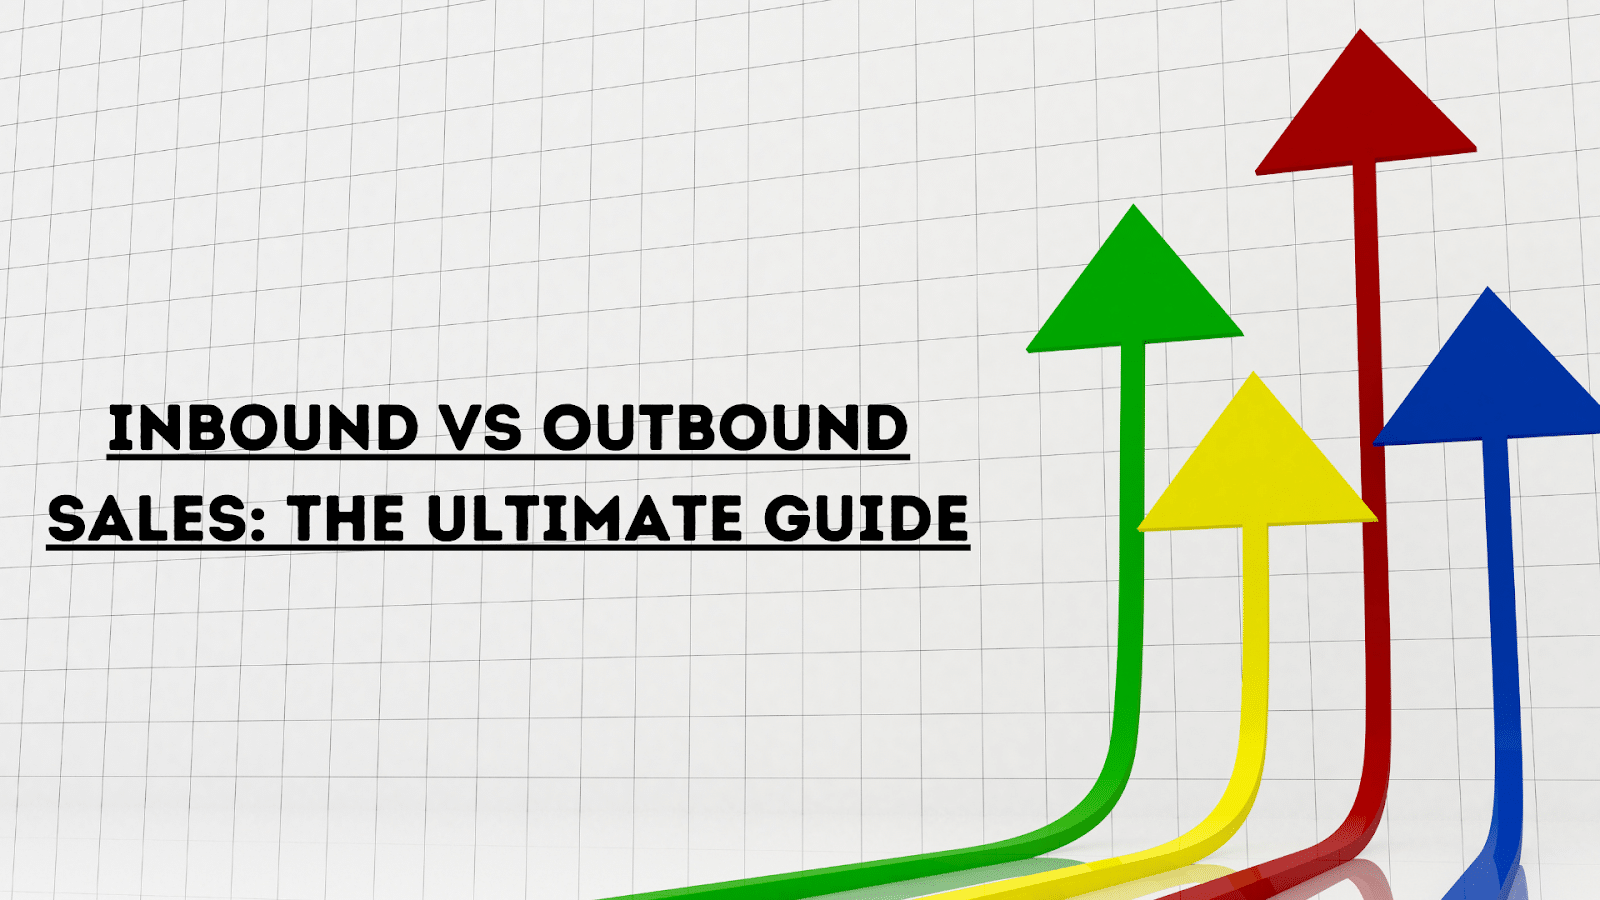 Inbound vs Outbound Sales: The Ultimate Guide